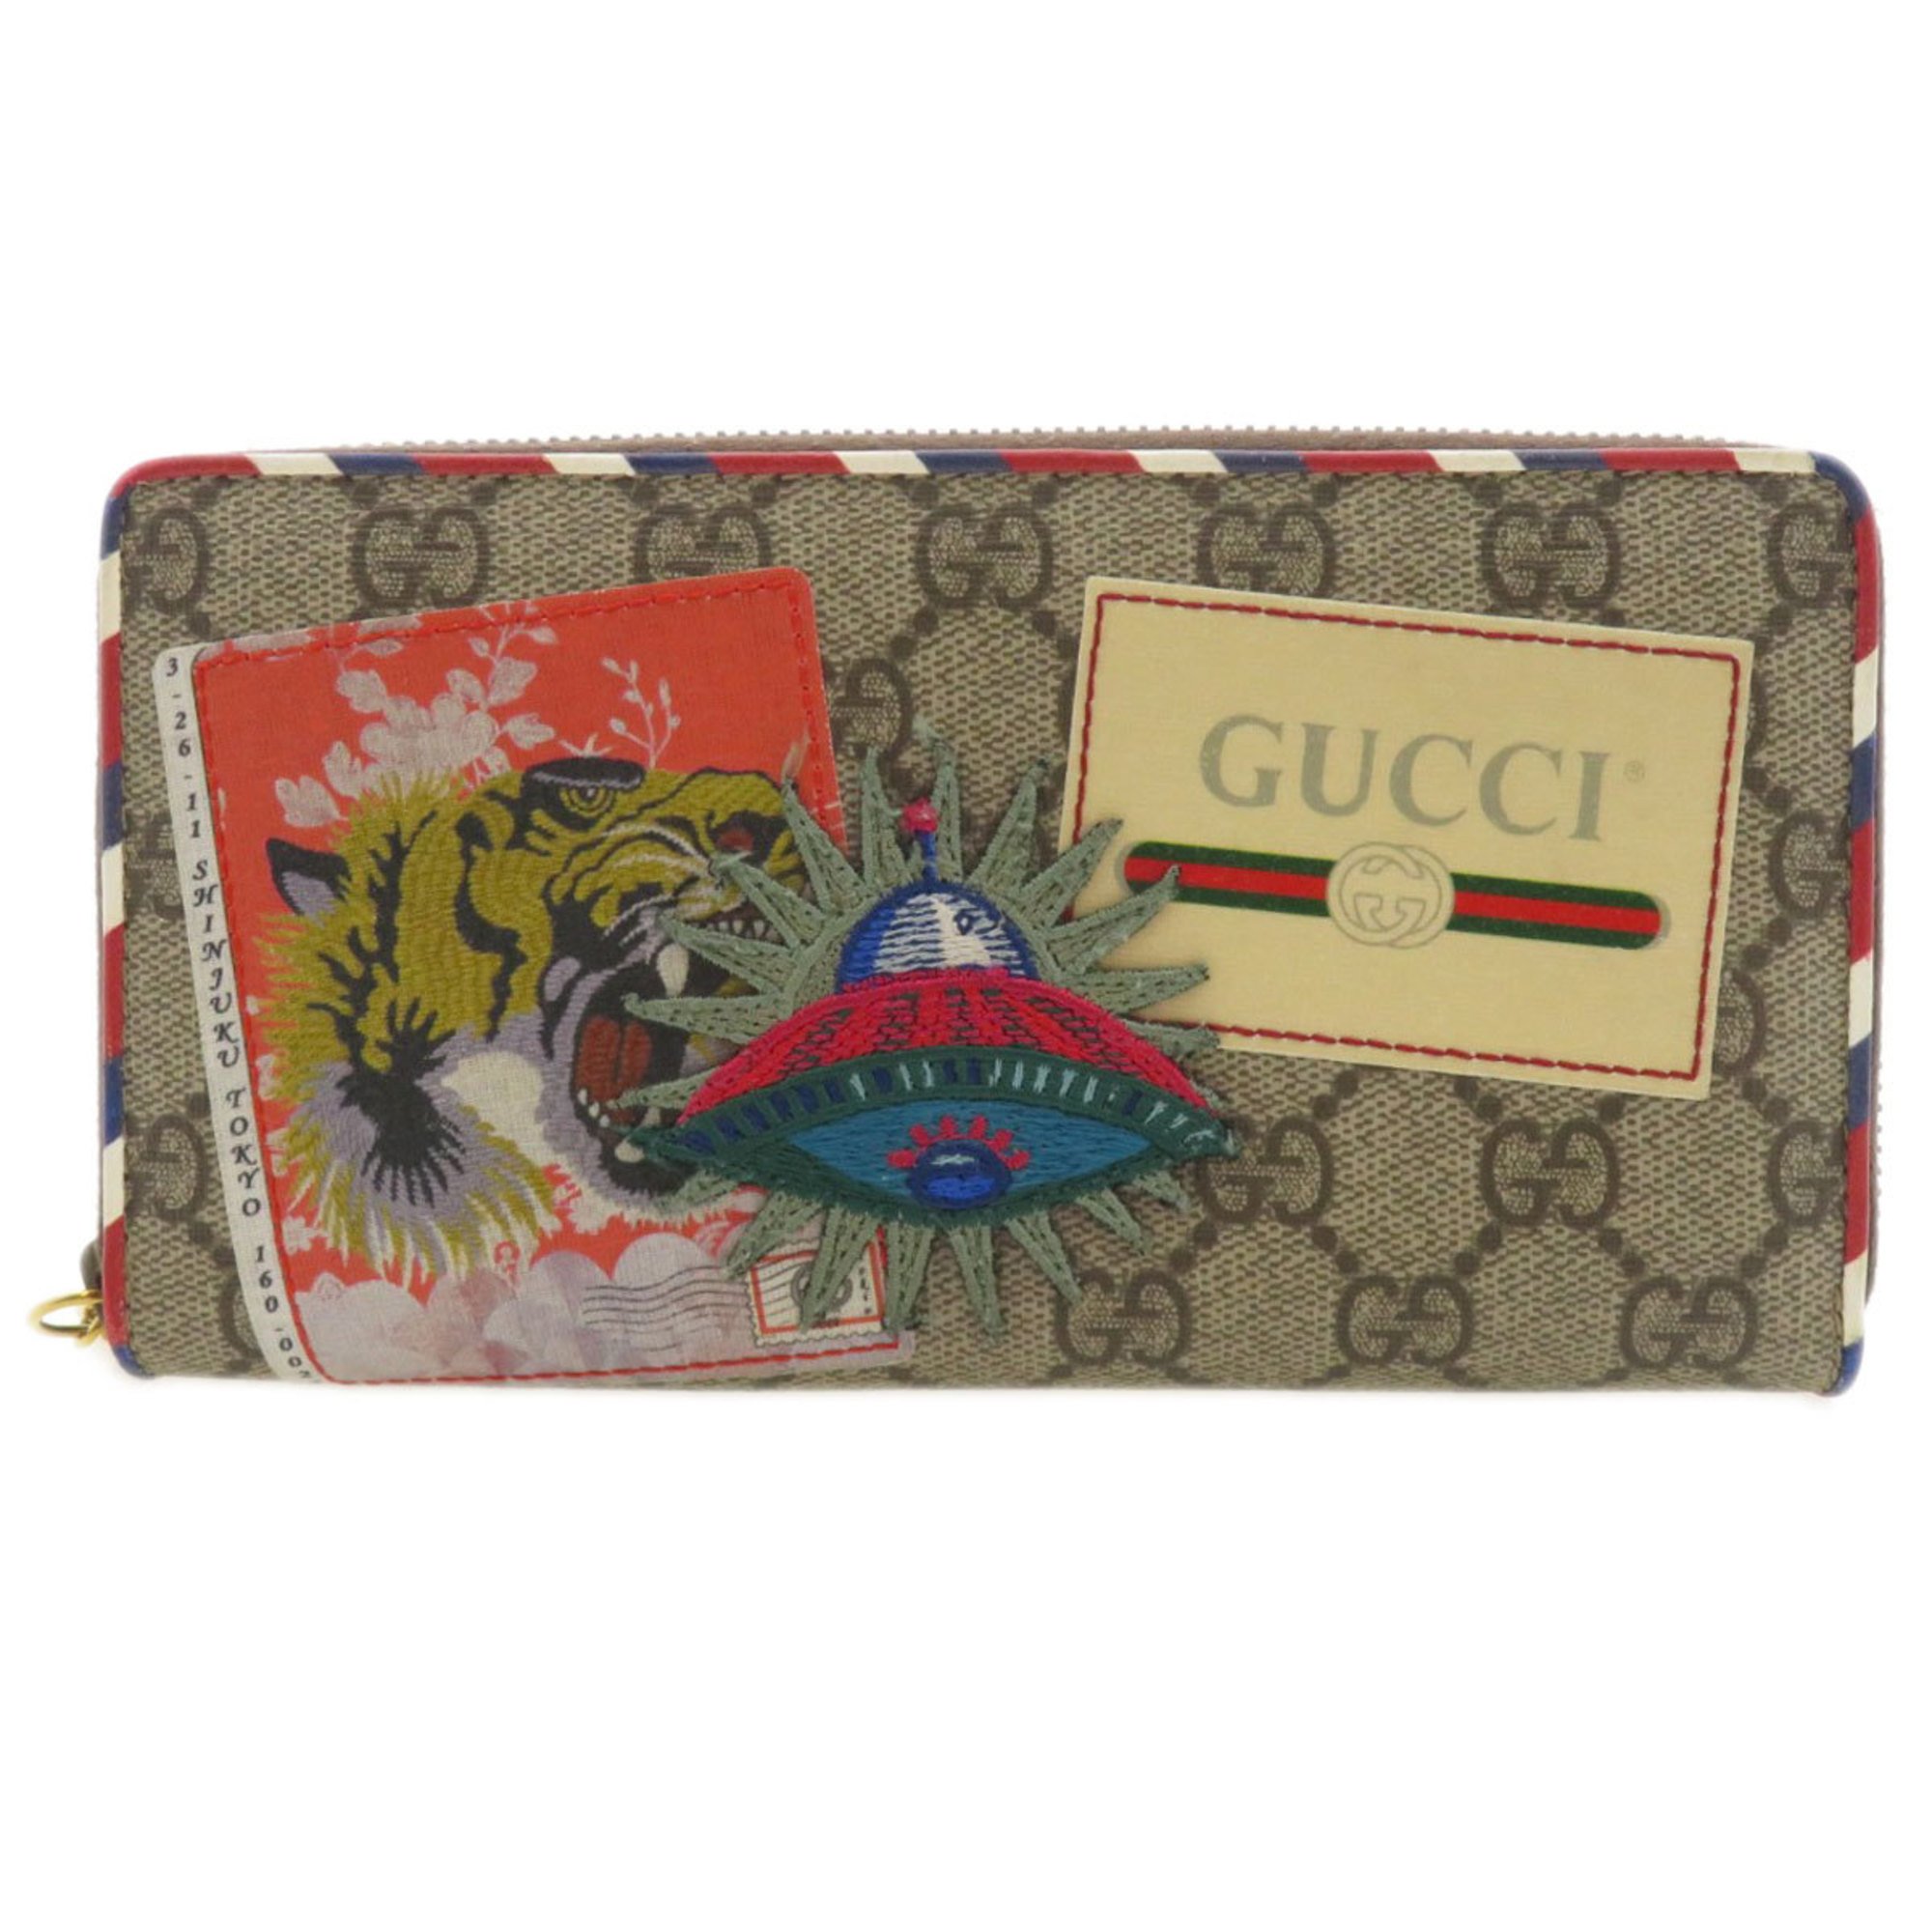 Gucci 473909 Courier GG Supreme Long Wallet Coated Canvas Leather Women's